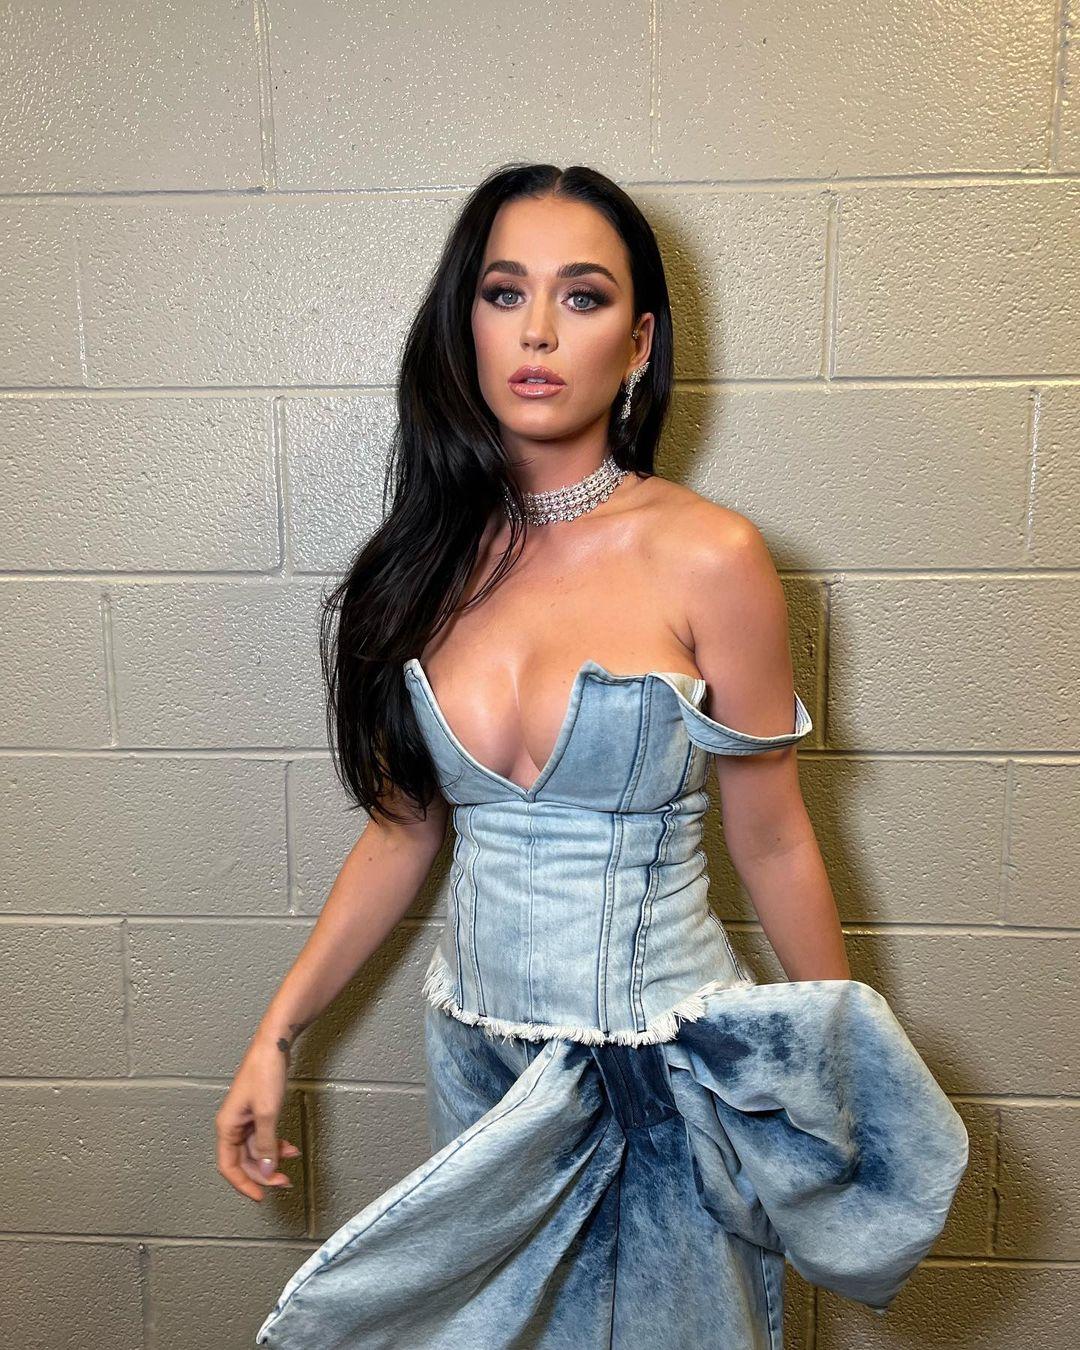 Katy Perry Followers Are Confused By Her CMA Appearance, Accuse Her Of 'Switching Sides'